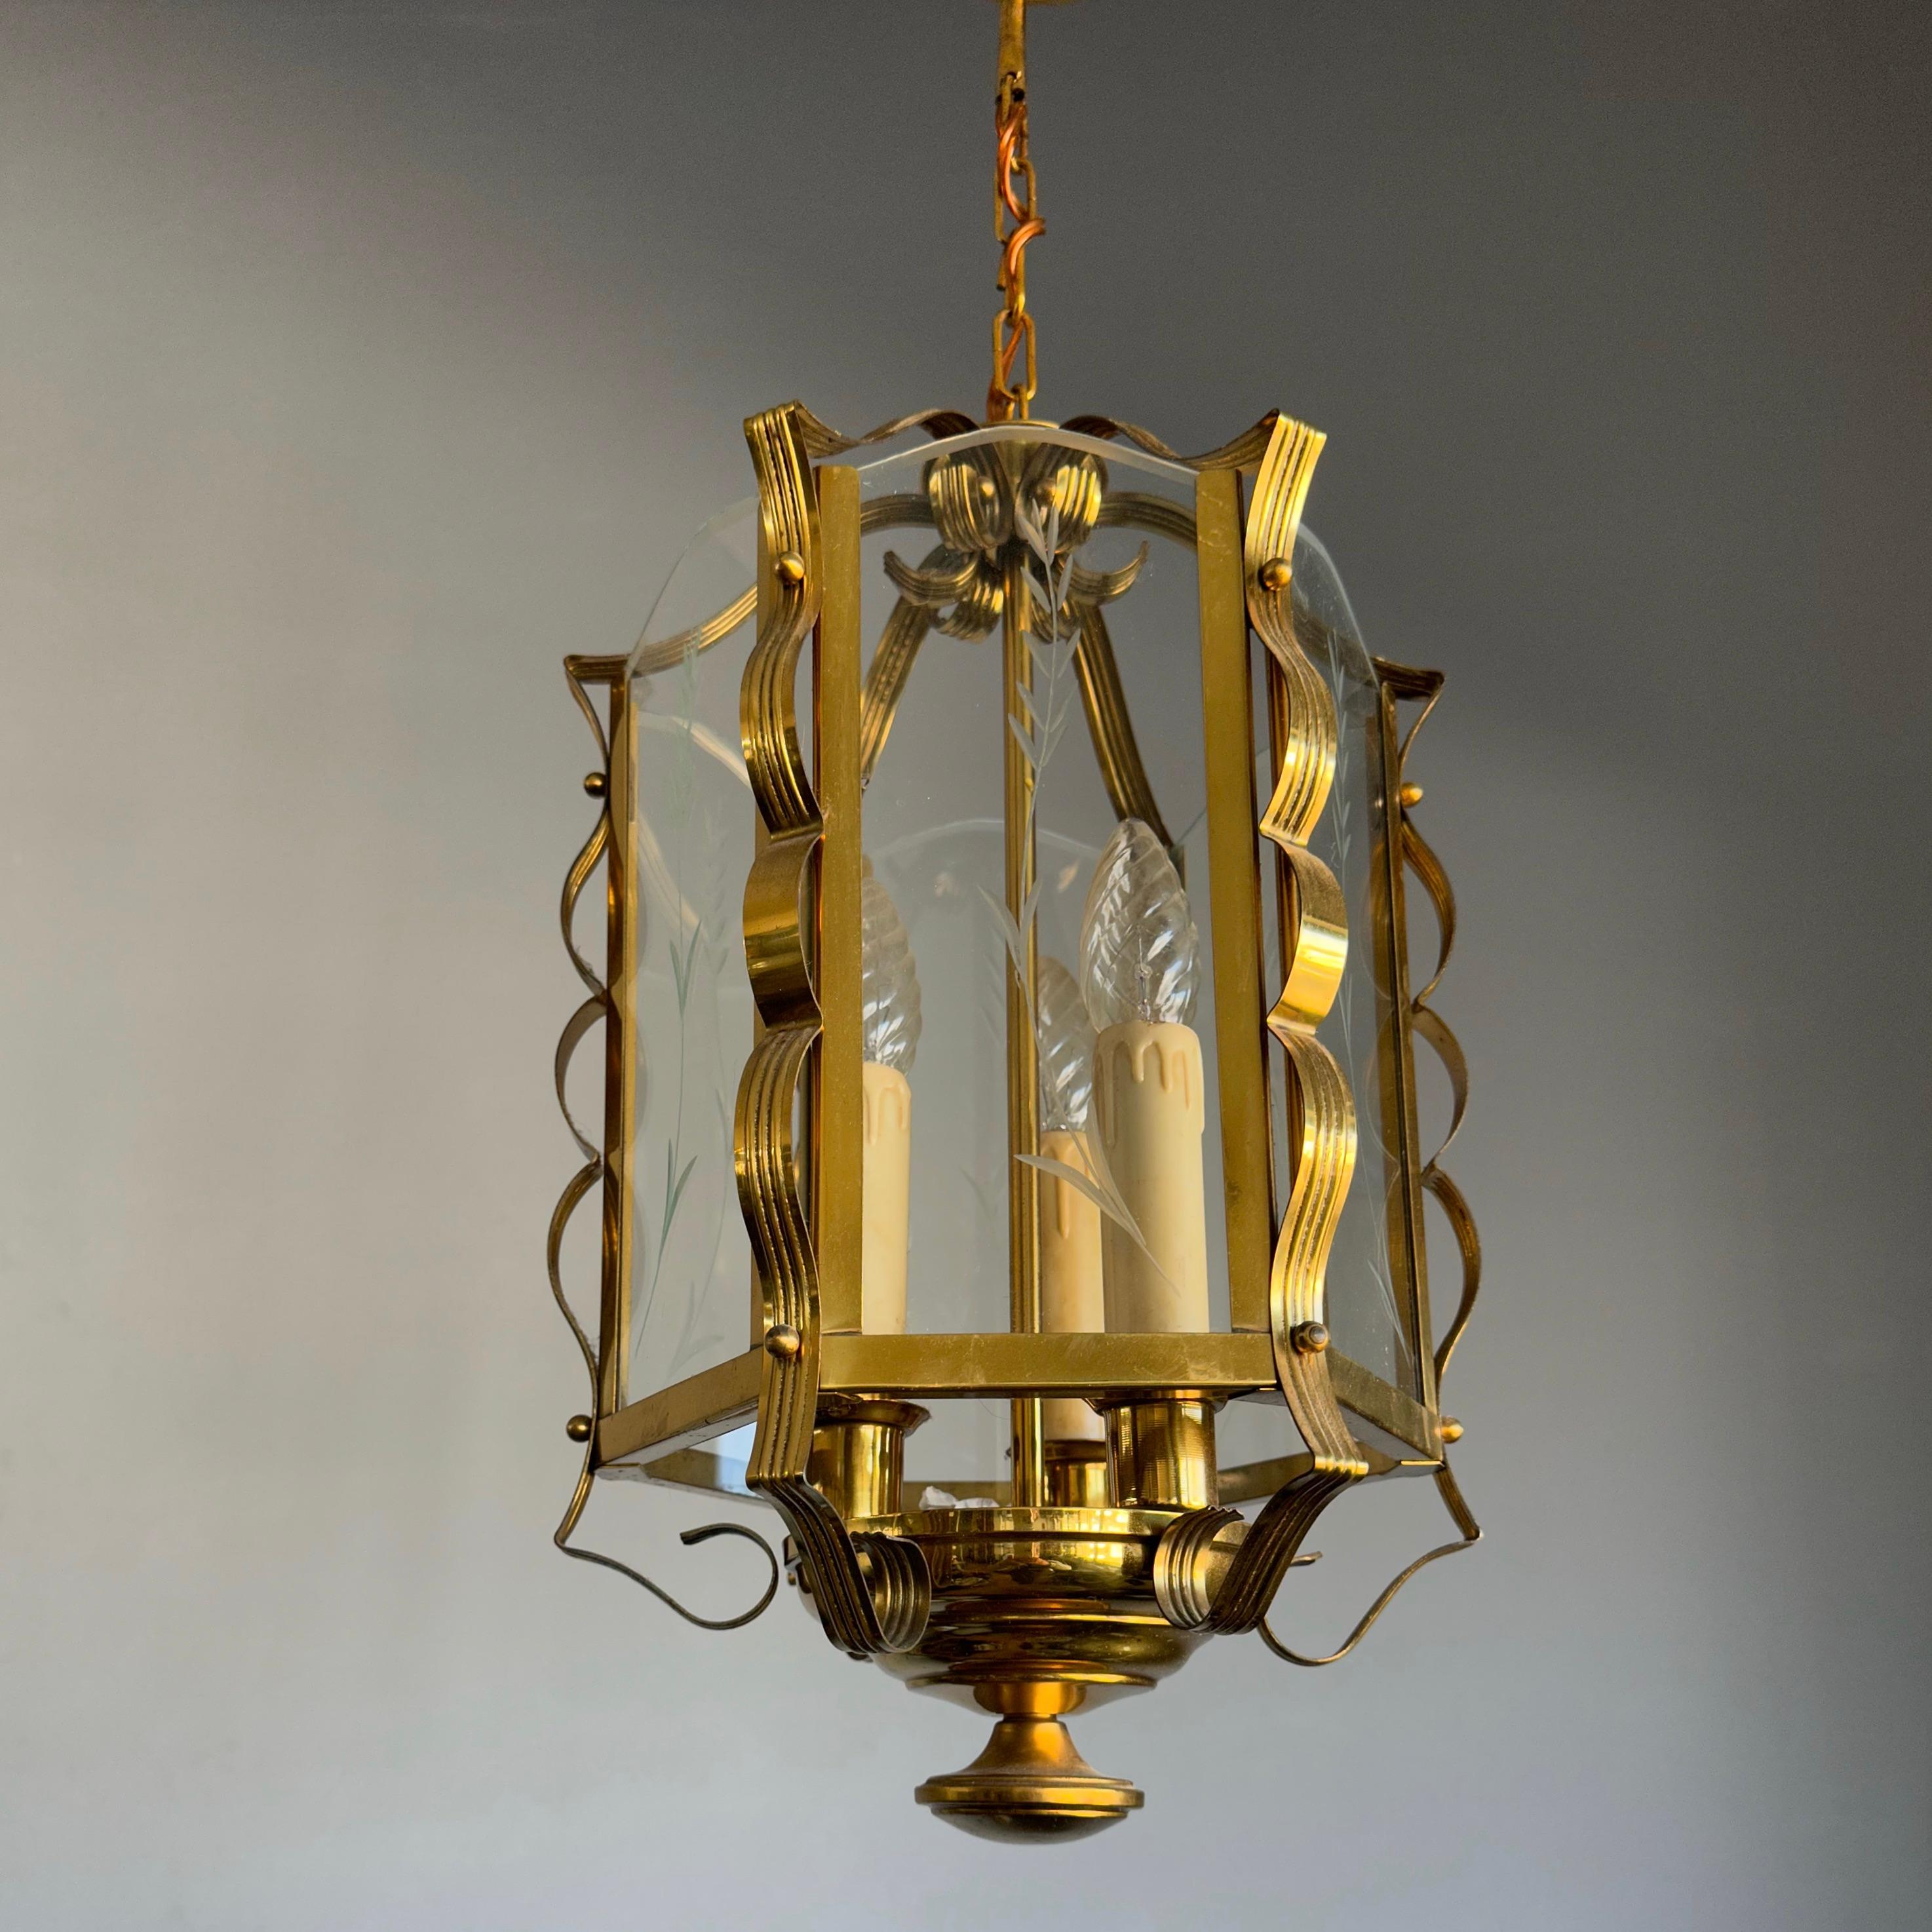 Stylish Design Arts & Crafts Brass, Engraved Glass Lantern Pendant Light Fixture In Good Condition For Sale In Lisse, NL